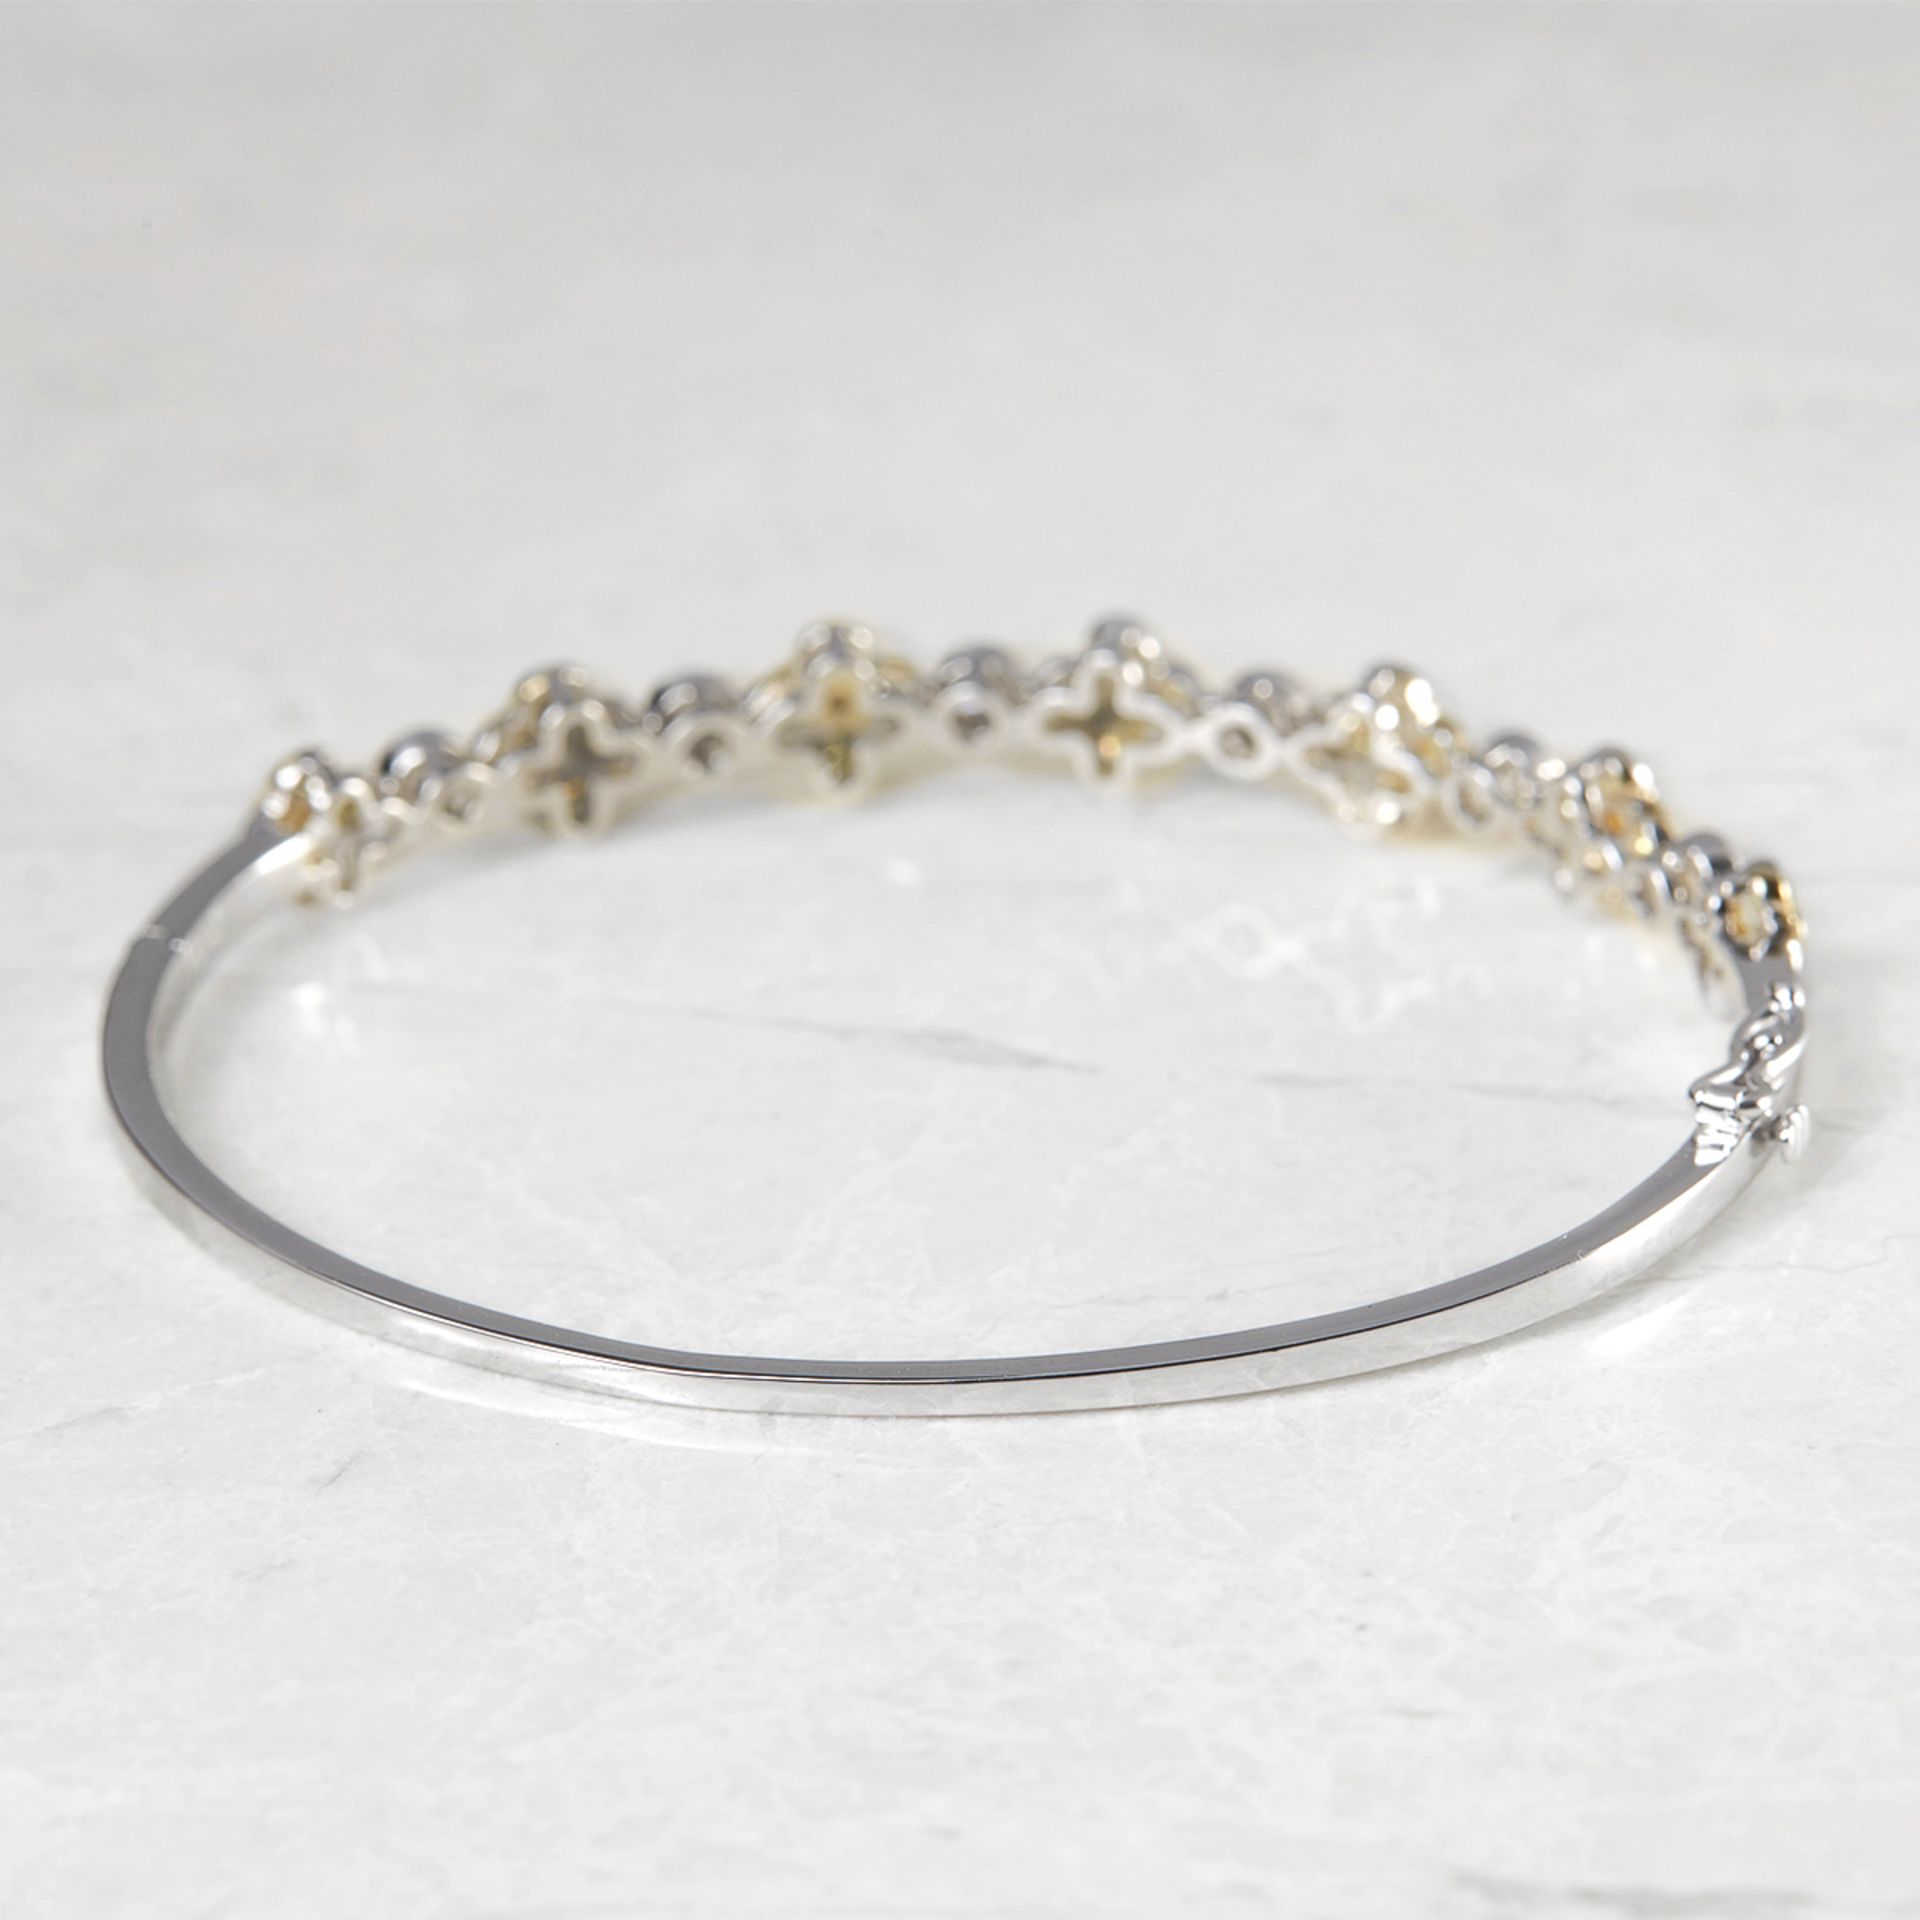 Unbranded, 18k White Gold Fancy Yellow Diamond Floral Bangle - Image 3 of 6